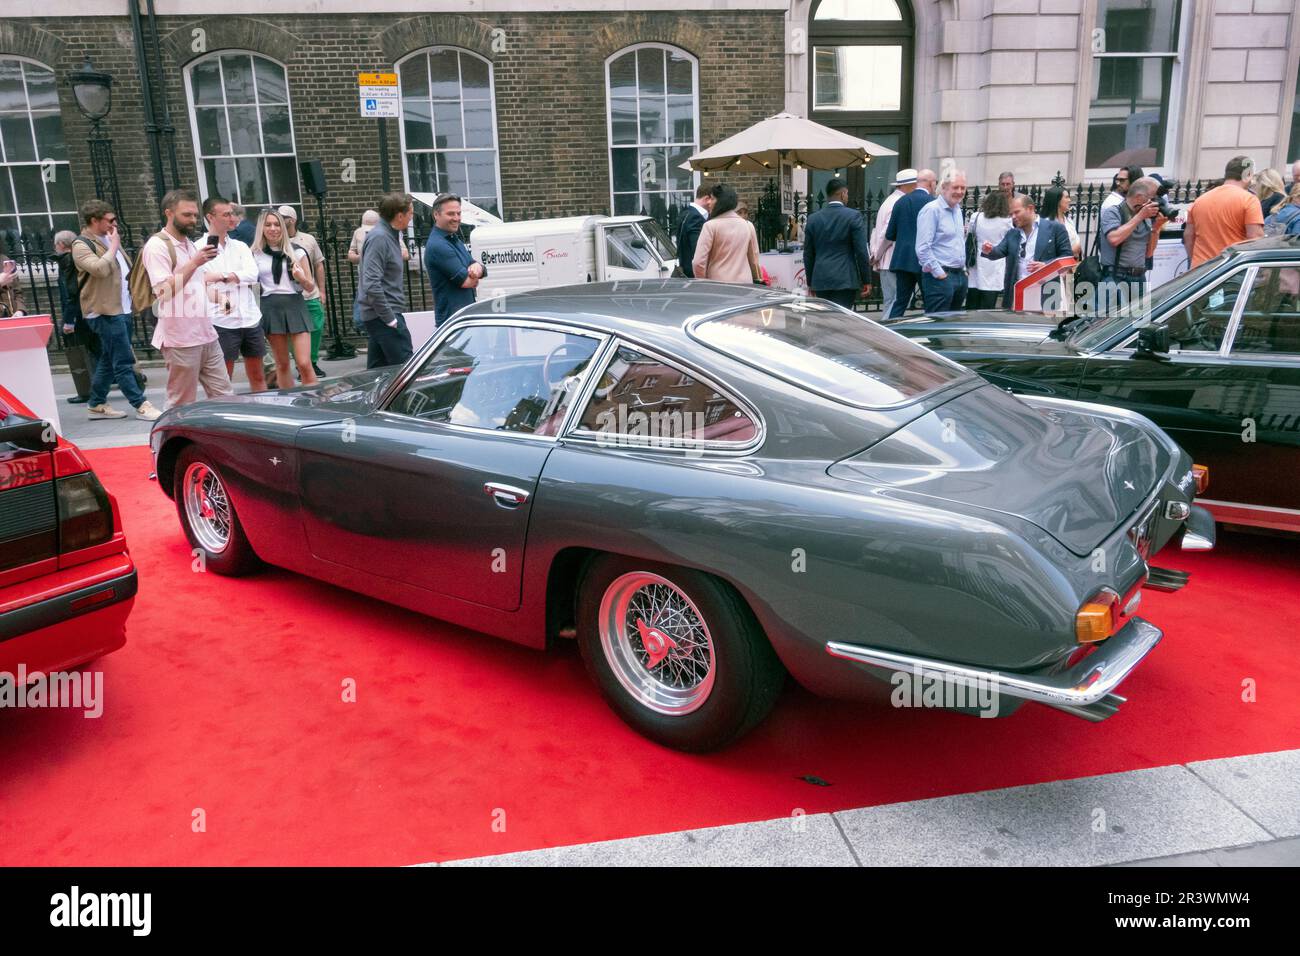 Ex Paul McCartney 1968 Lamborghini 400 GT at the Concours on Savile Row 2023. Classic car concours on the famous street for Tailoring in London UK Stock Photo